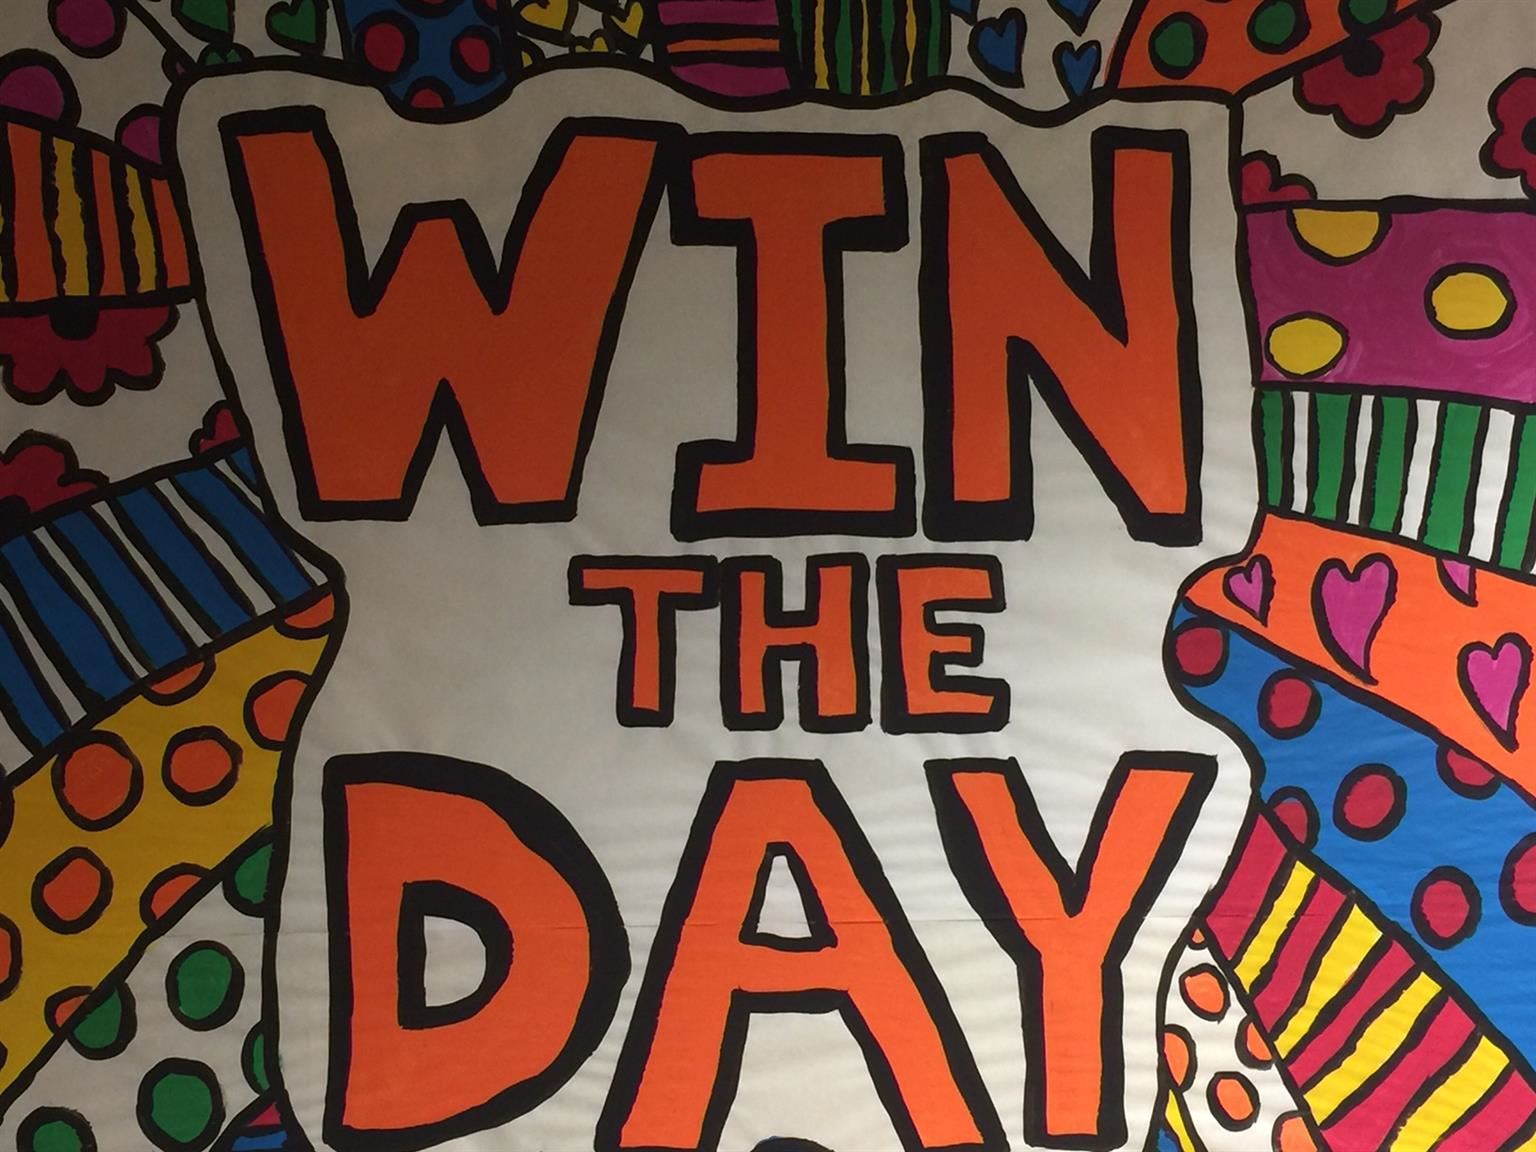 Win the Day